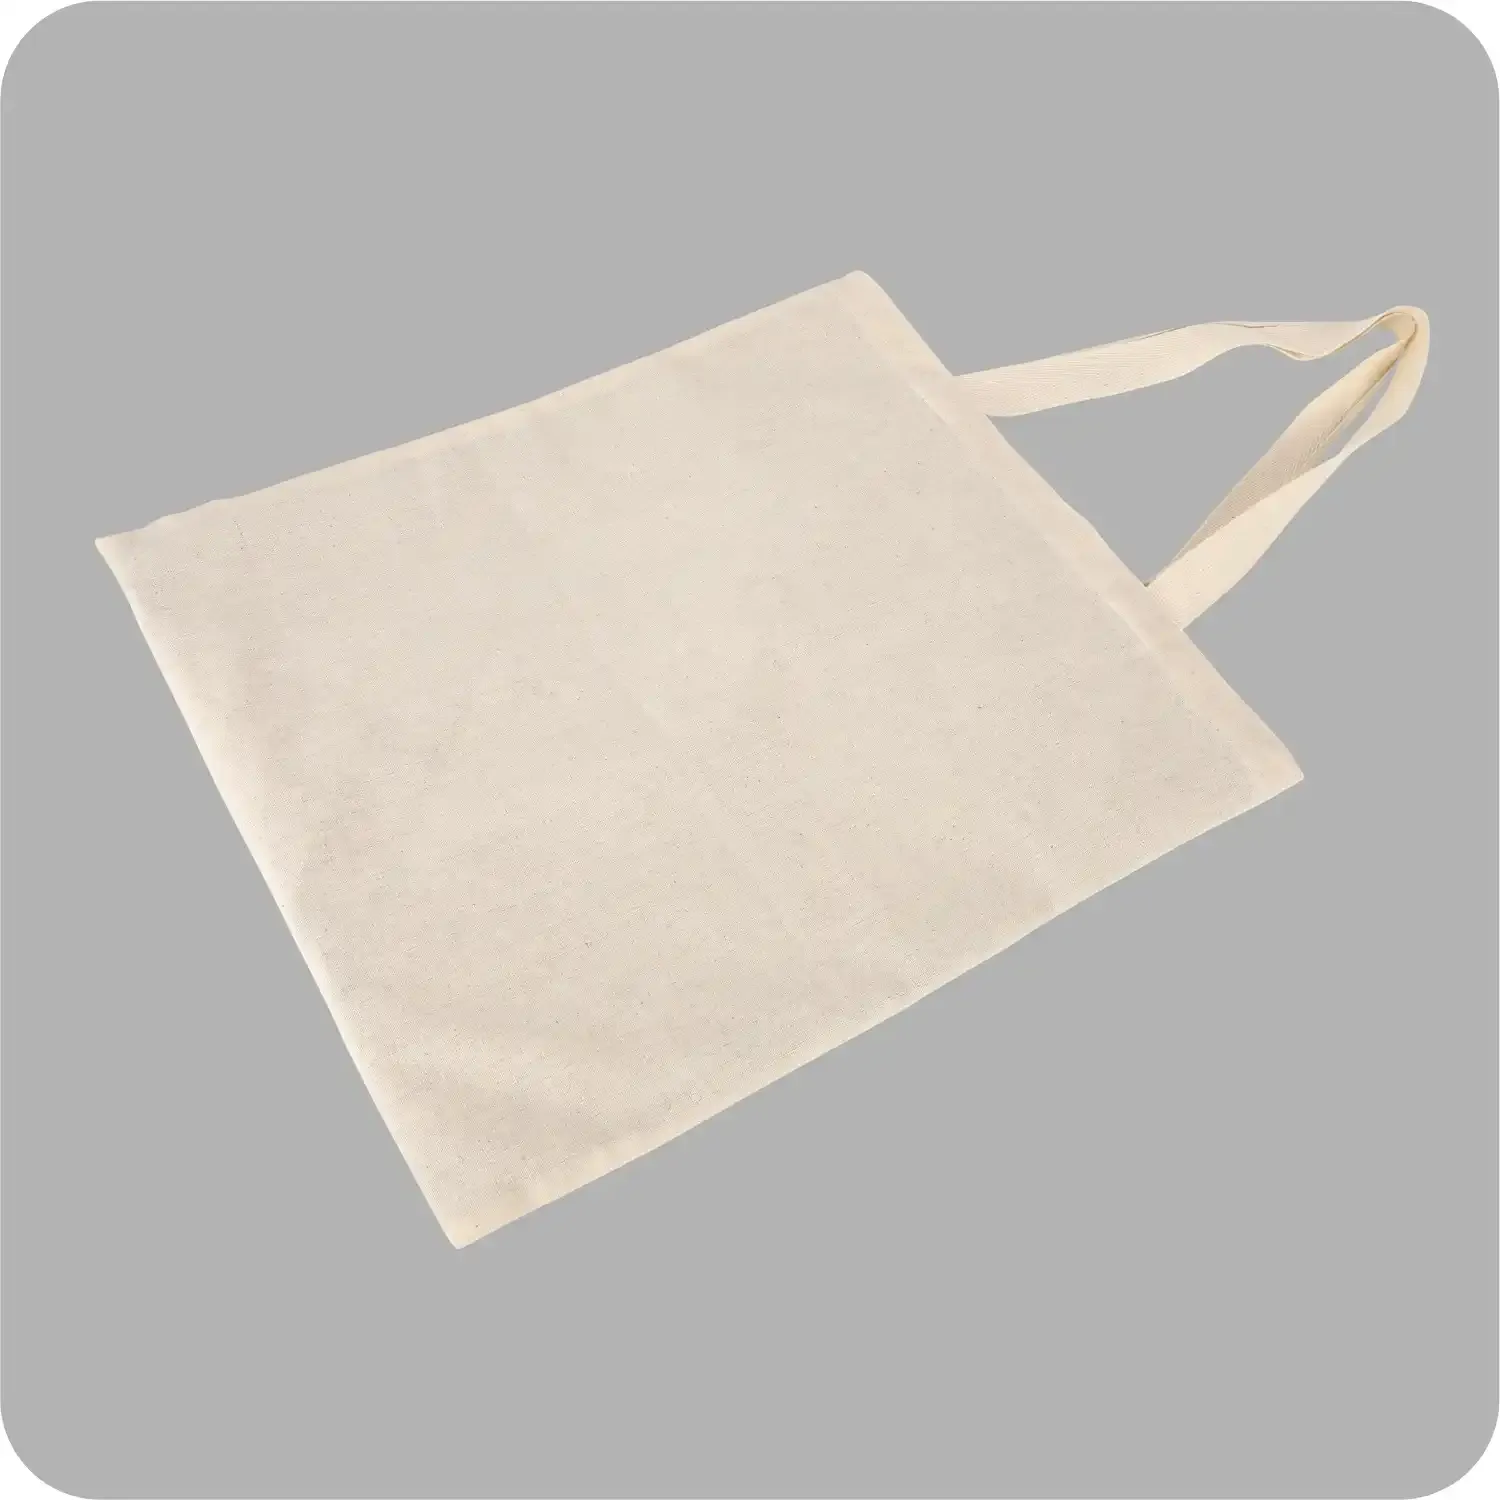 Cute and Consistent 13”x15” Multipurpose Cotton Bag (Pack of 100)